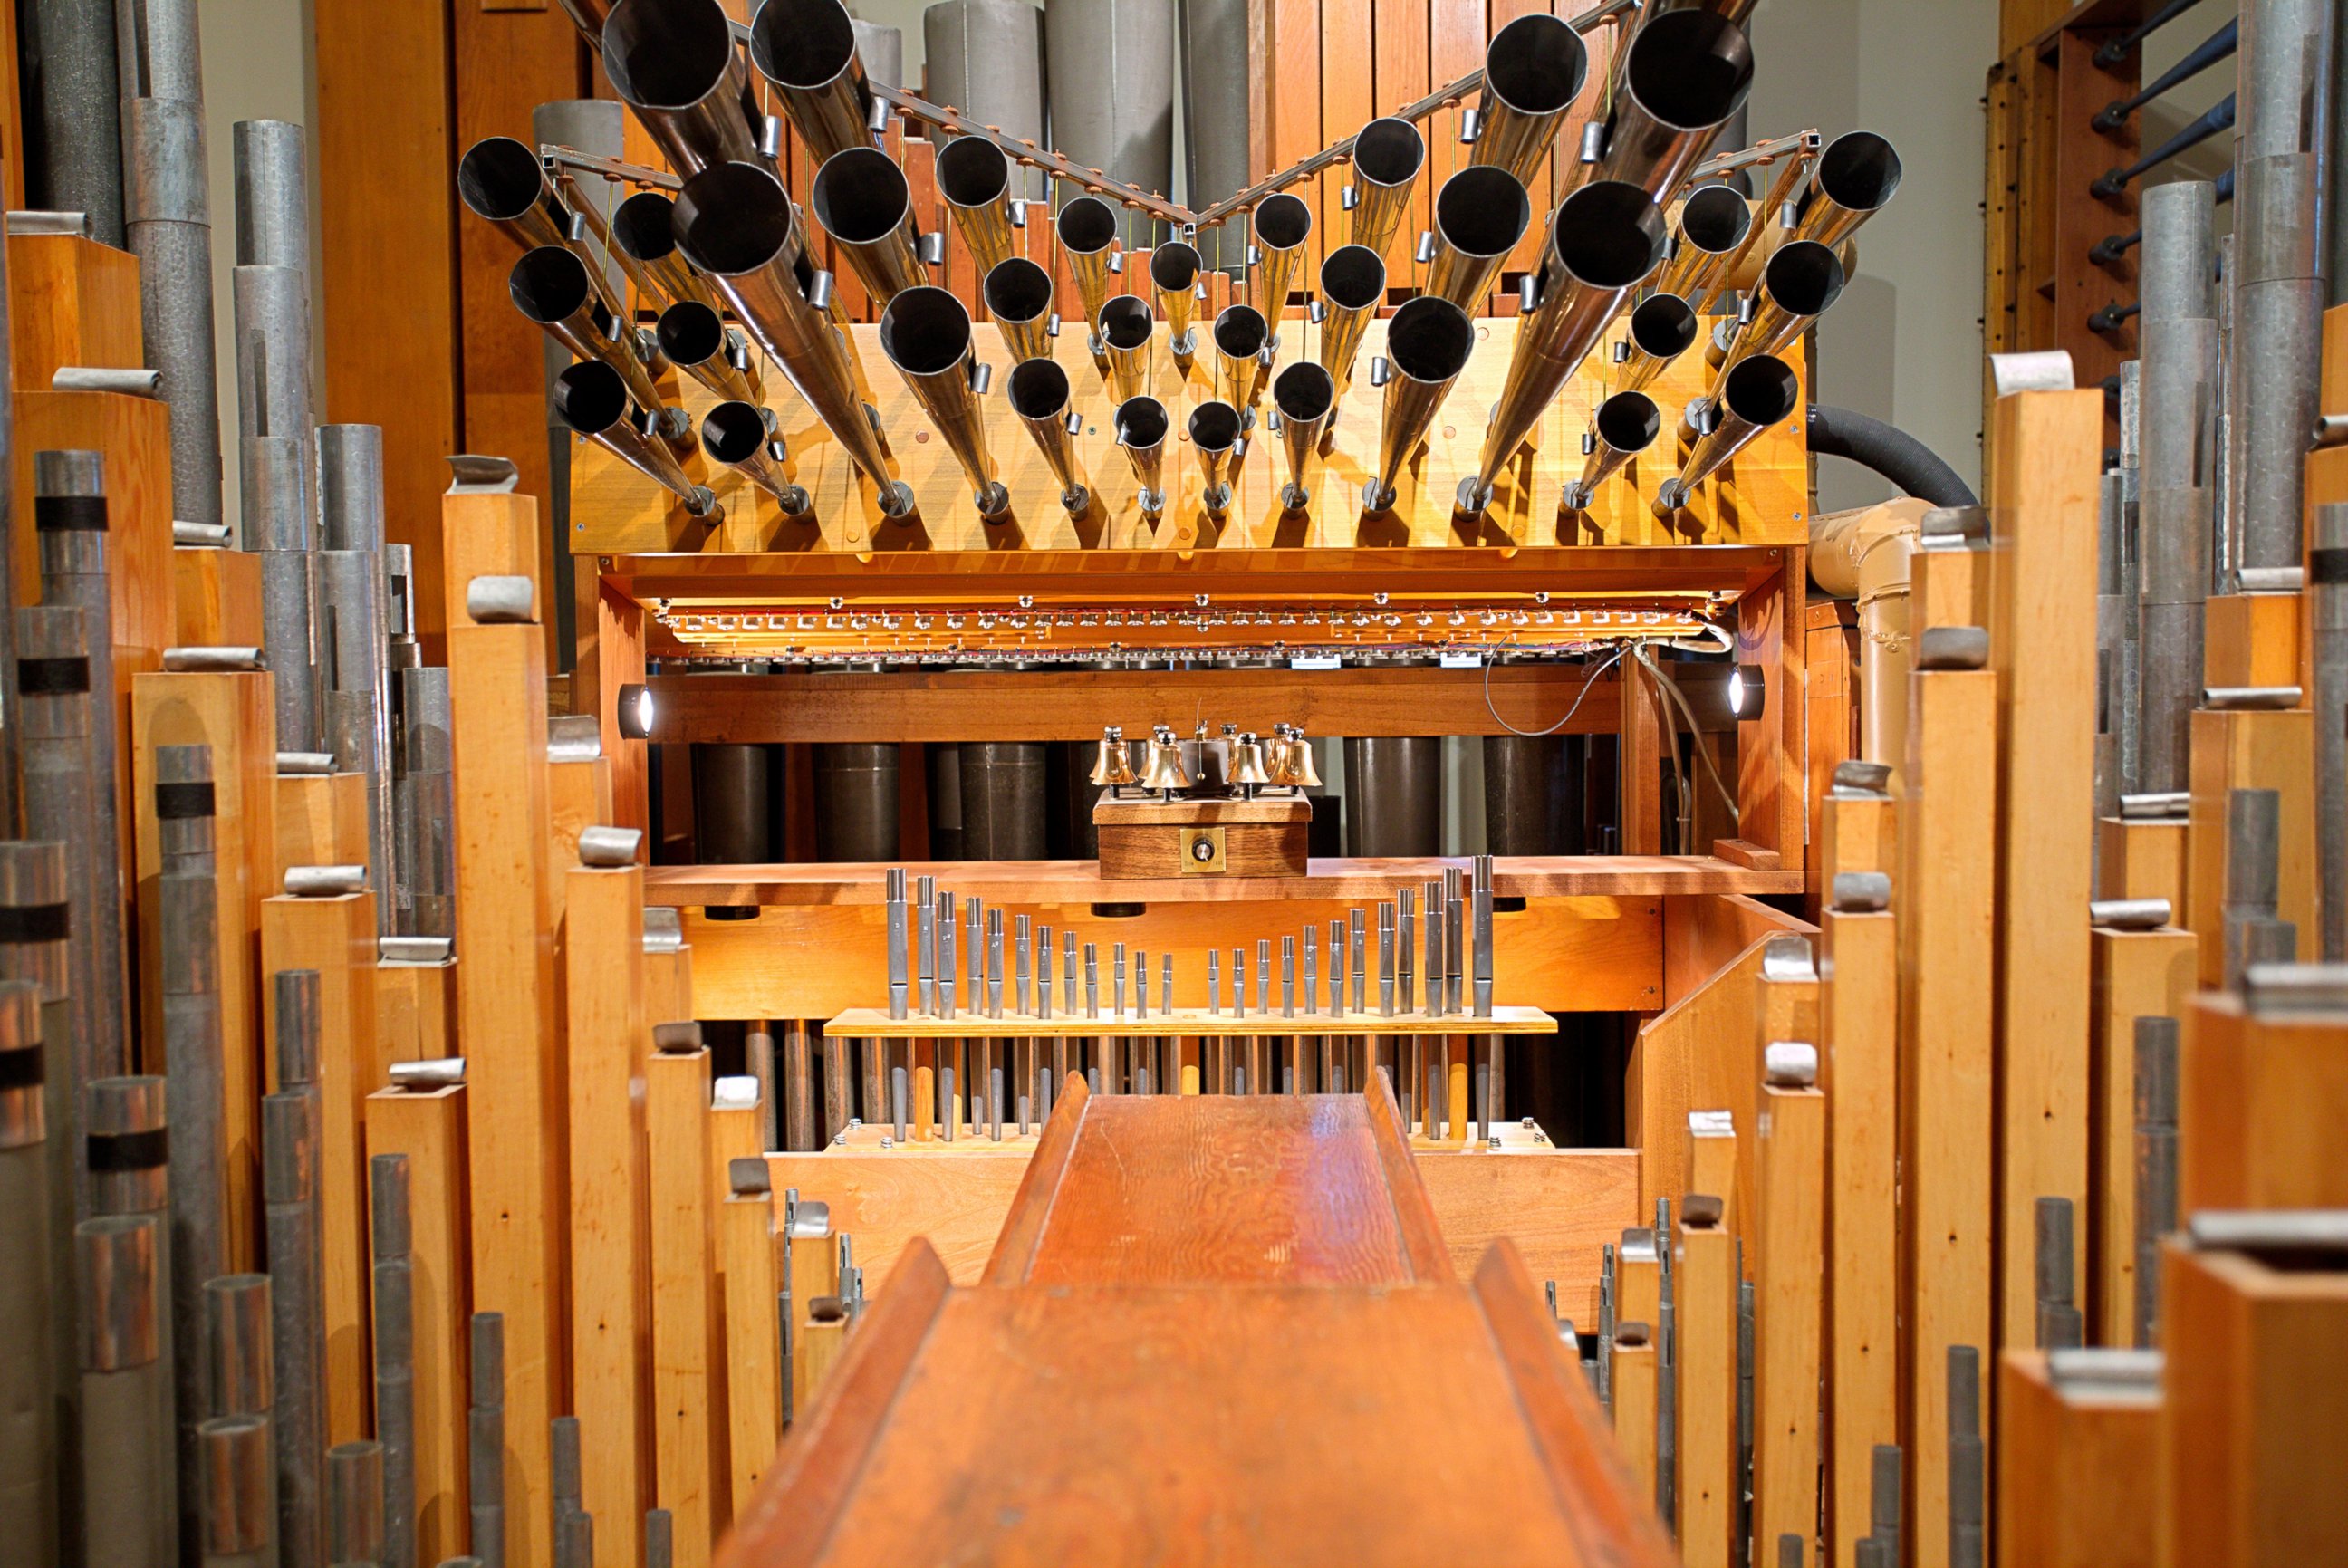 PHOTO: A 2,300-piece pipe organ is a surprising feature of a Michigan home for sale.